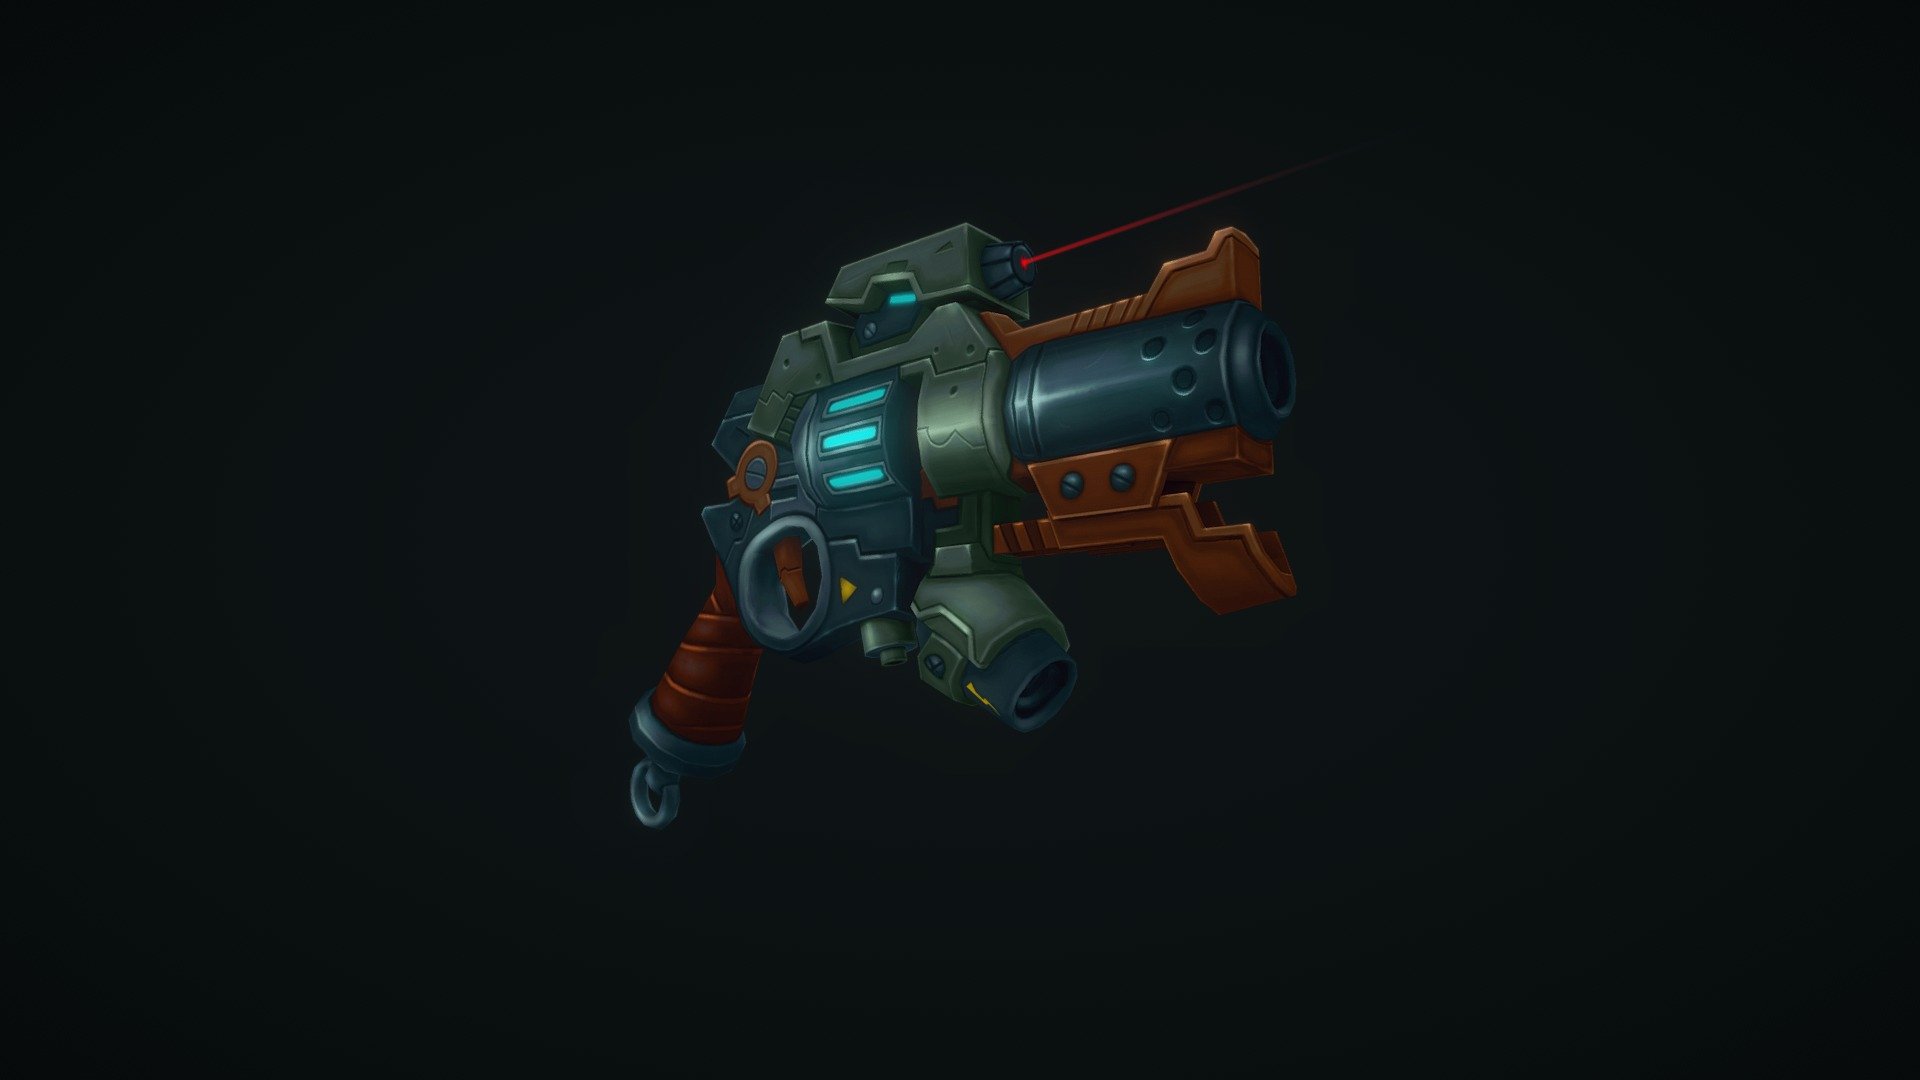 This is a pistol I made based on concepts I found on wildstar's official site! - Wildstar Pistol - 3D model by Miki Bencz (@cordero) 3d model